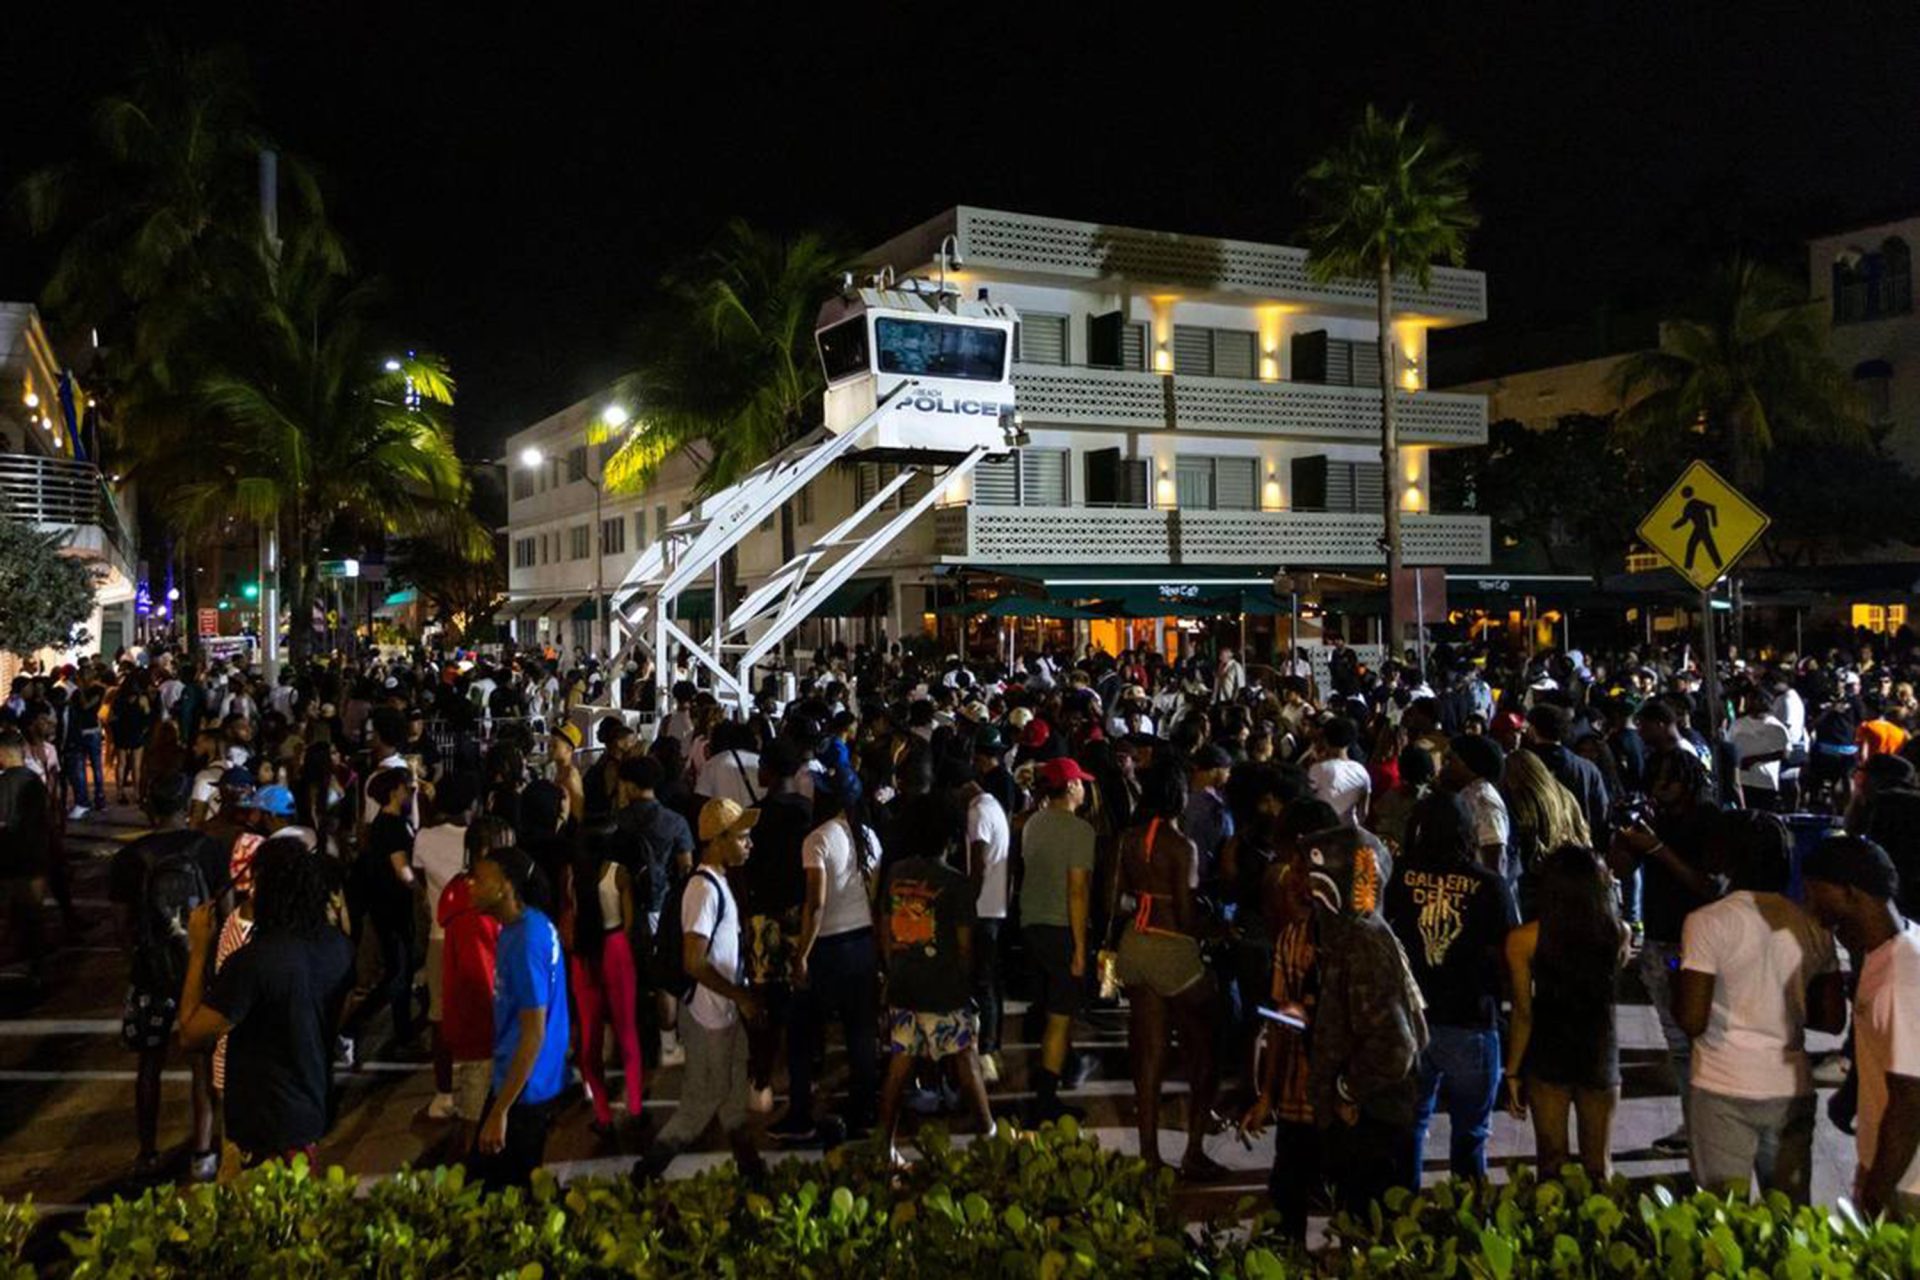 Crowds gather at Ocean Drive and Eighth Street during spring break in Miami Beach, Florida, on March 18, 2023.